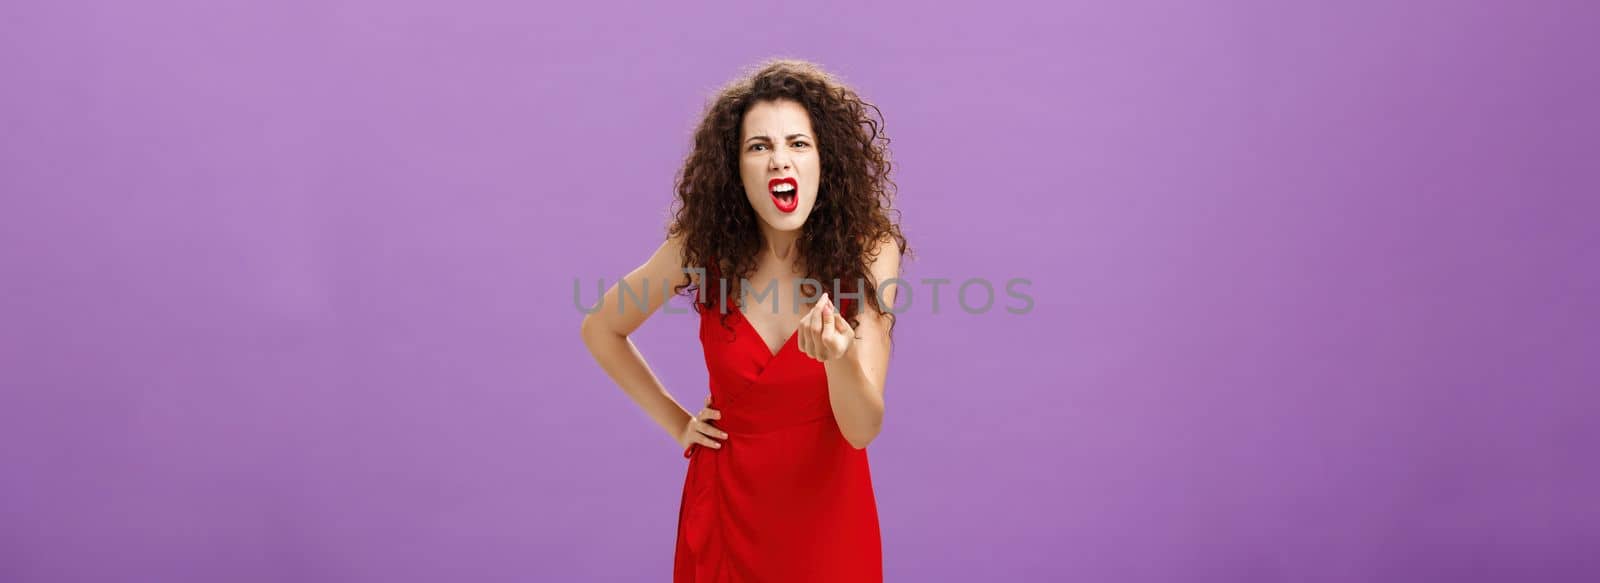 Woman in fury fighting with husband over money. making italian gesture with fingers shouting and yelling from fury and anger standing displeased and pissed over purple wall in red elegant dress.